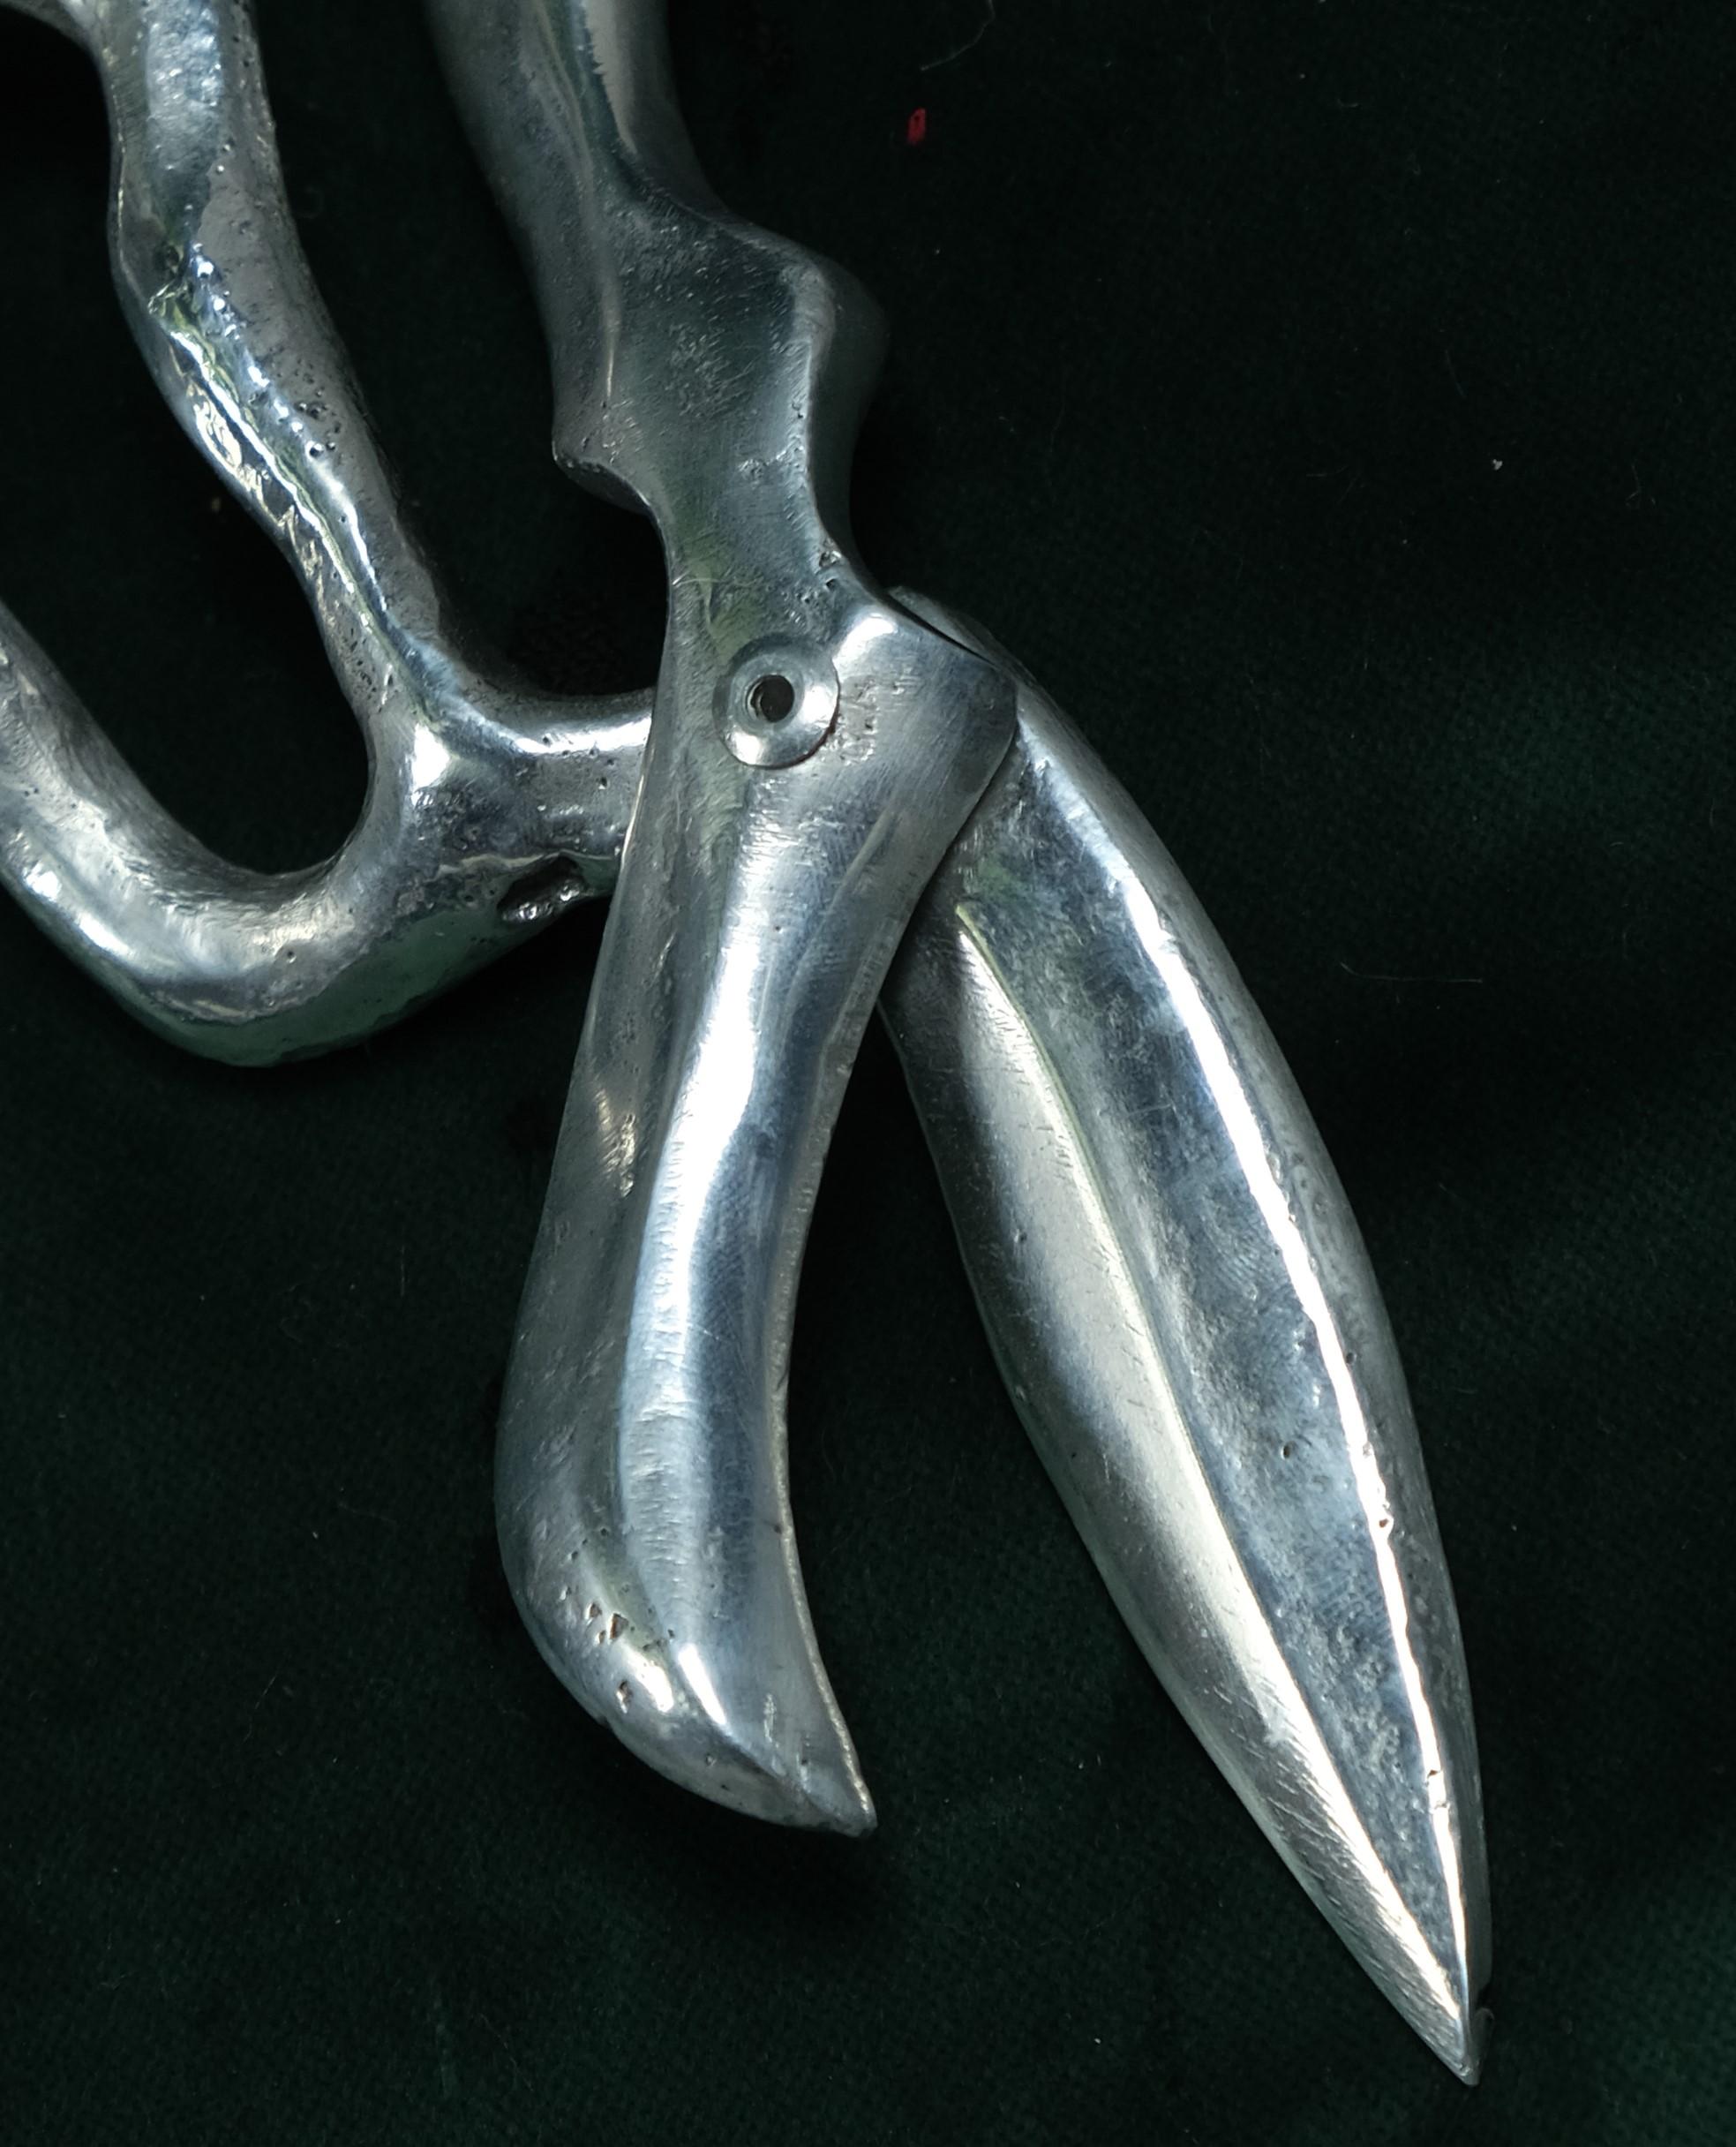 Aluminium scissors, can be used as a sculpture, a wall sculpture or even keyholder.

From the series 